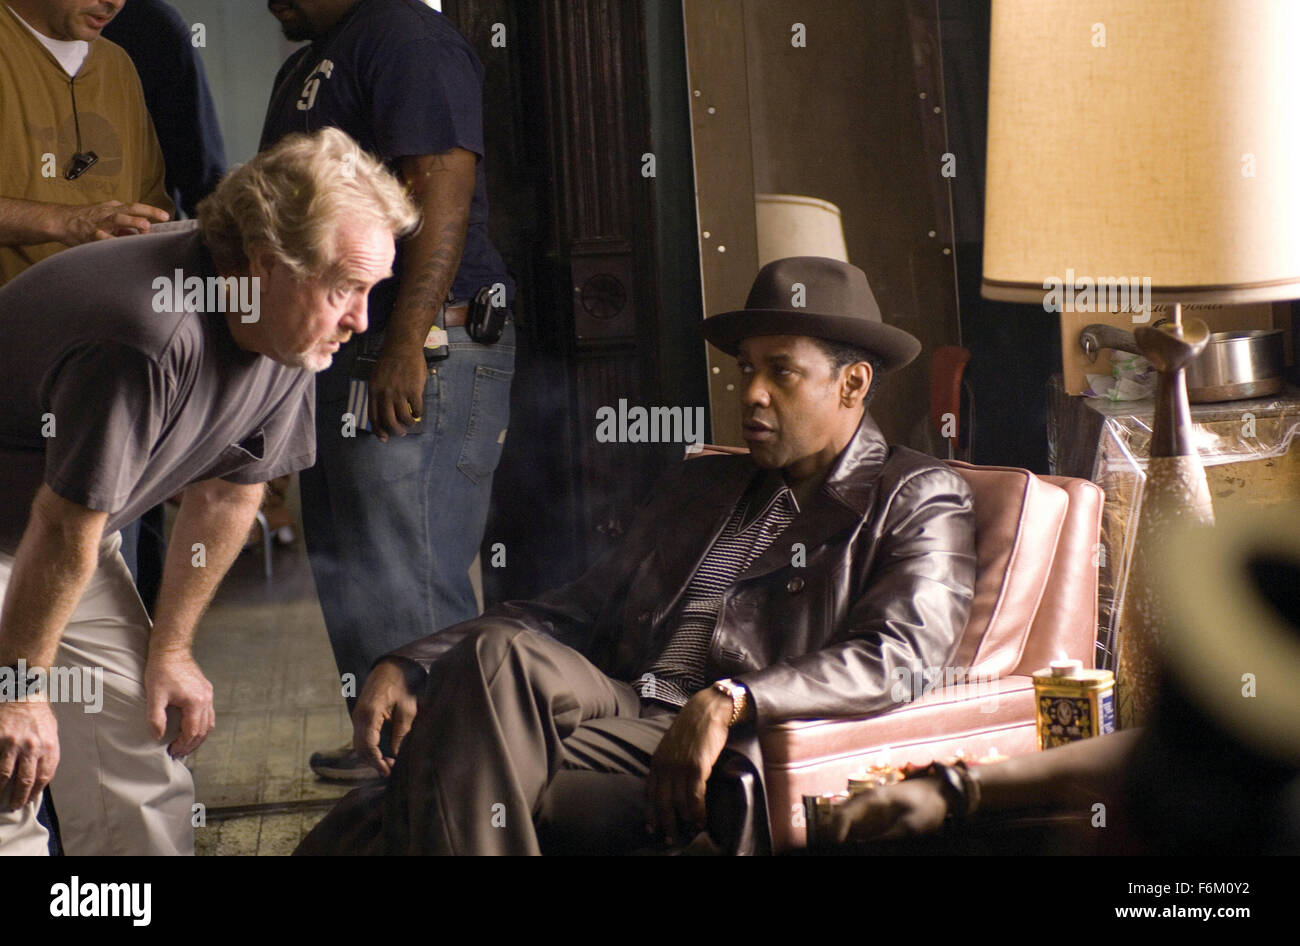 RELEASE DATE: November 2, 2007. MOVIE TITLE: American Gangster - STUDIO: Universal Pictures. PLOT: A drug lord smuggles heroin into Harlem during the 1970s by hiding the stash inside the coffins of American soldiers returning from Vietnam. PICTURED: Director/Producer RIDLEY SCOTT and DENZEL WASHINGTON as gangster Frank Lucas. Stock Photo